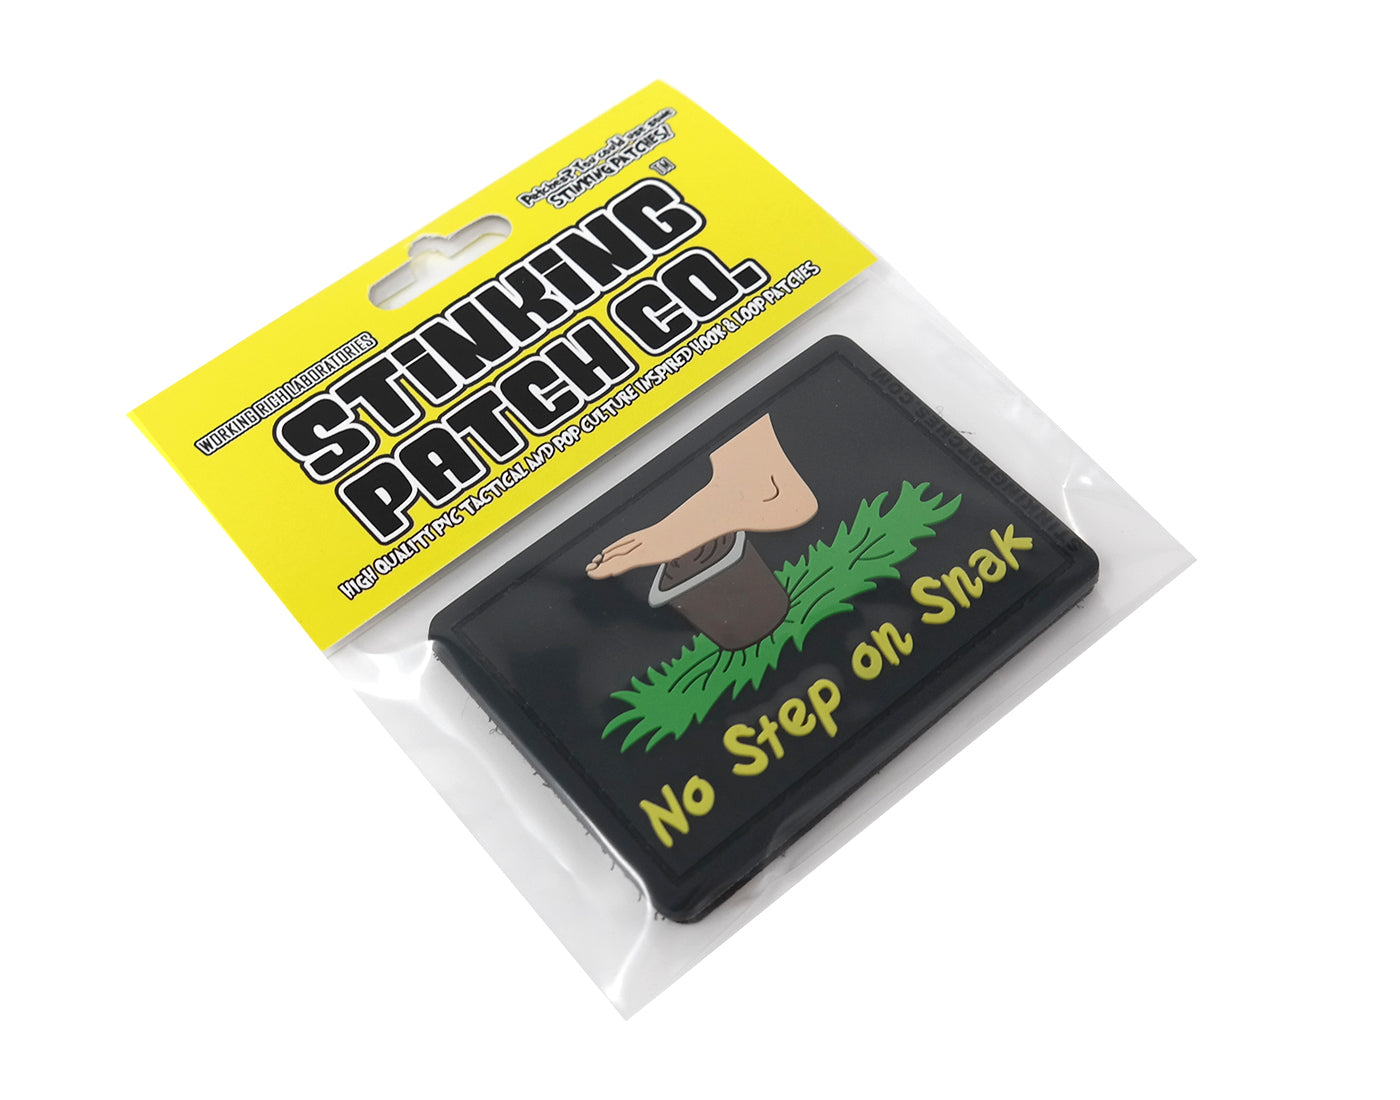 Stinking Patch Company  High Quality PVC Tactical Patches